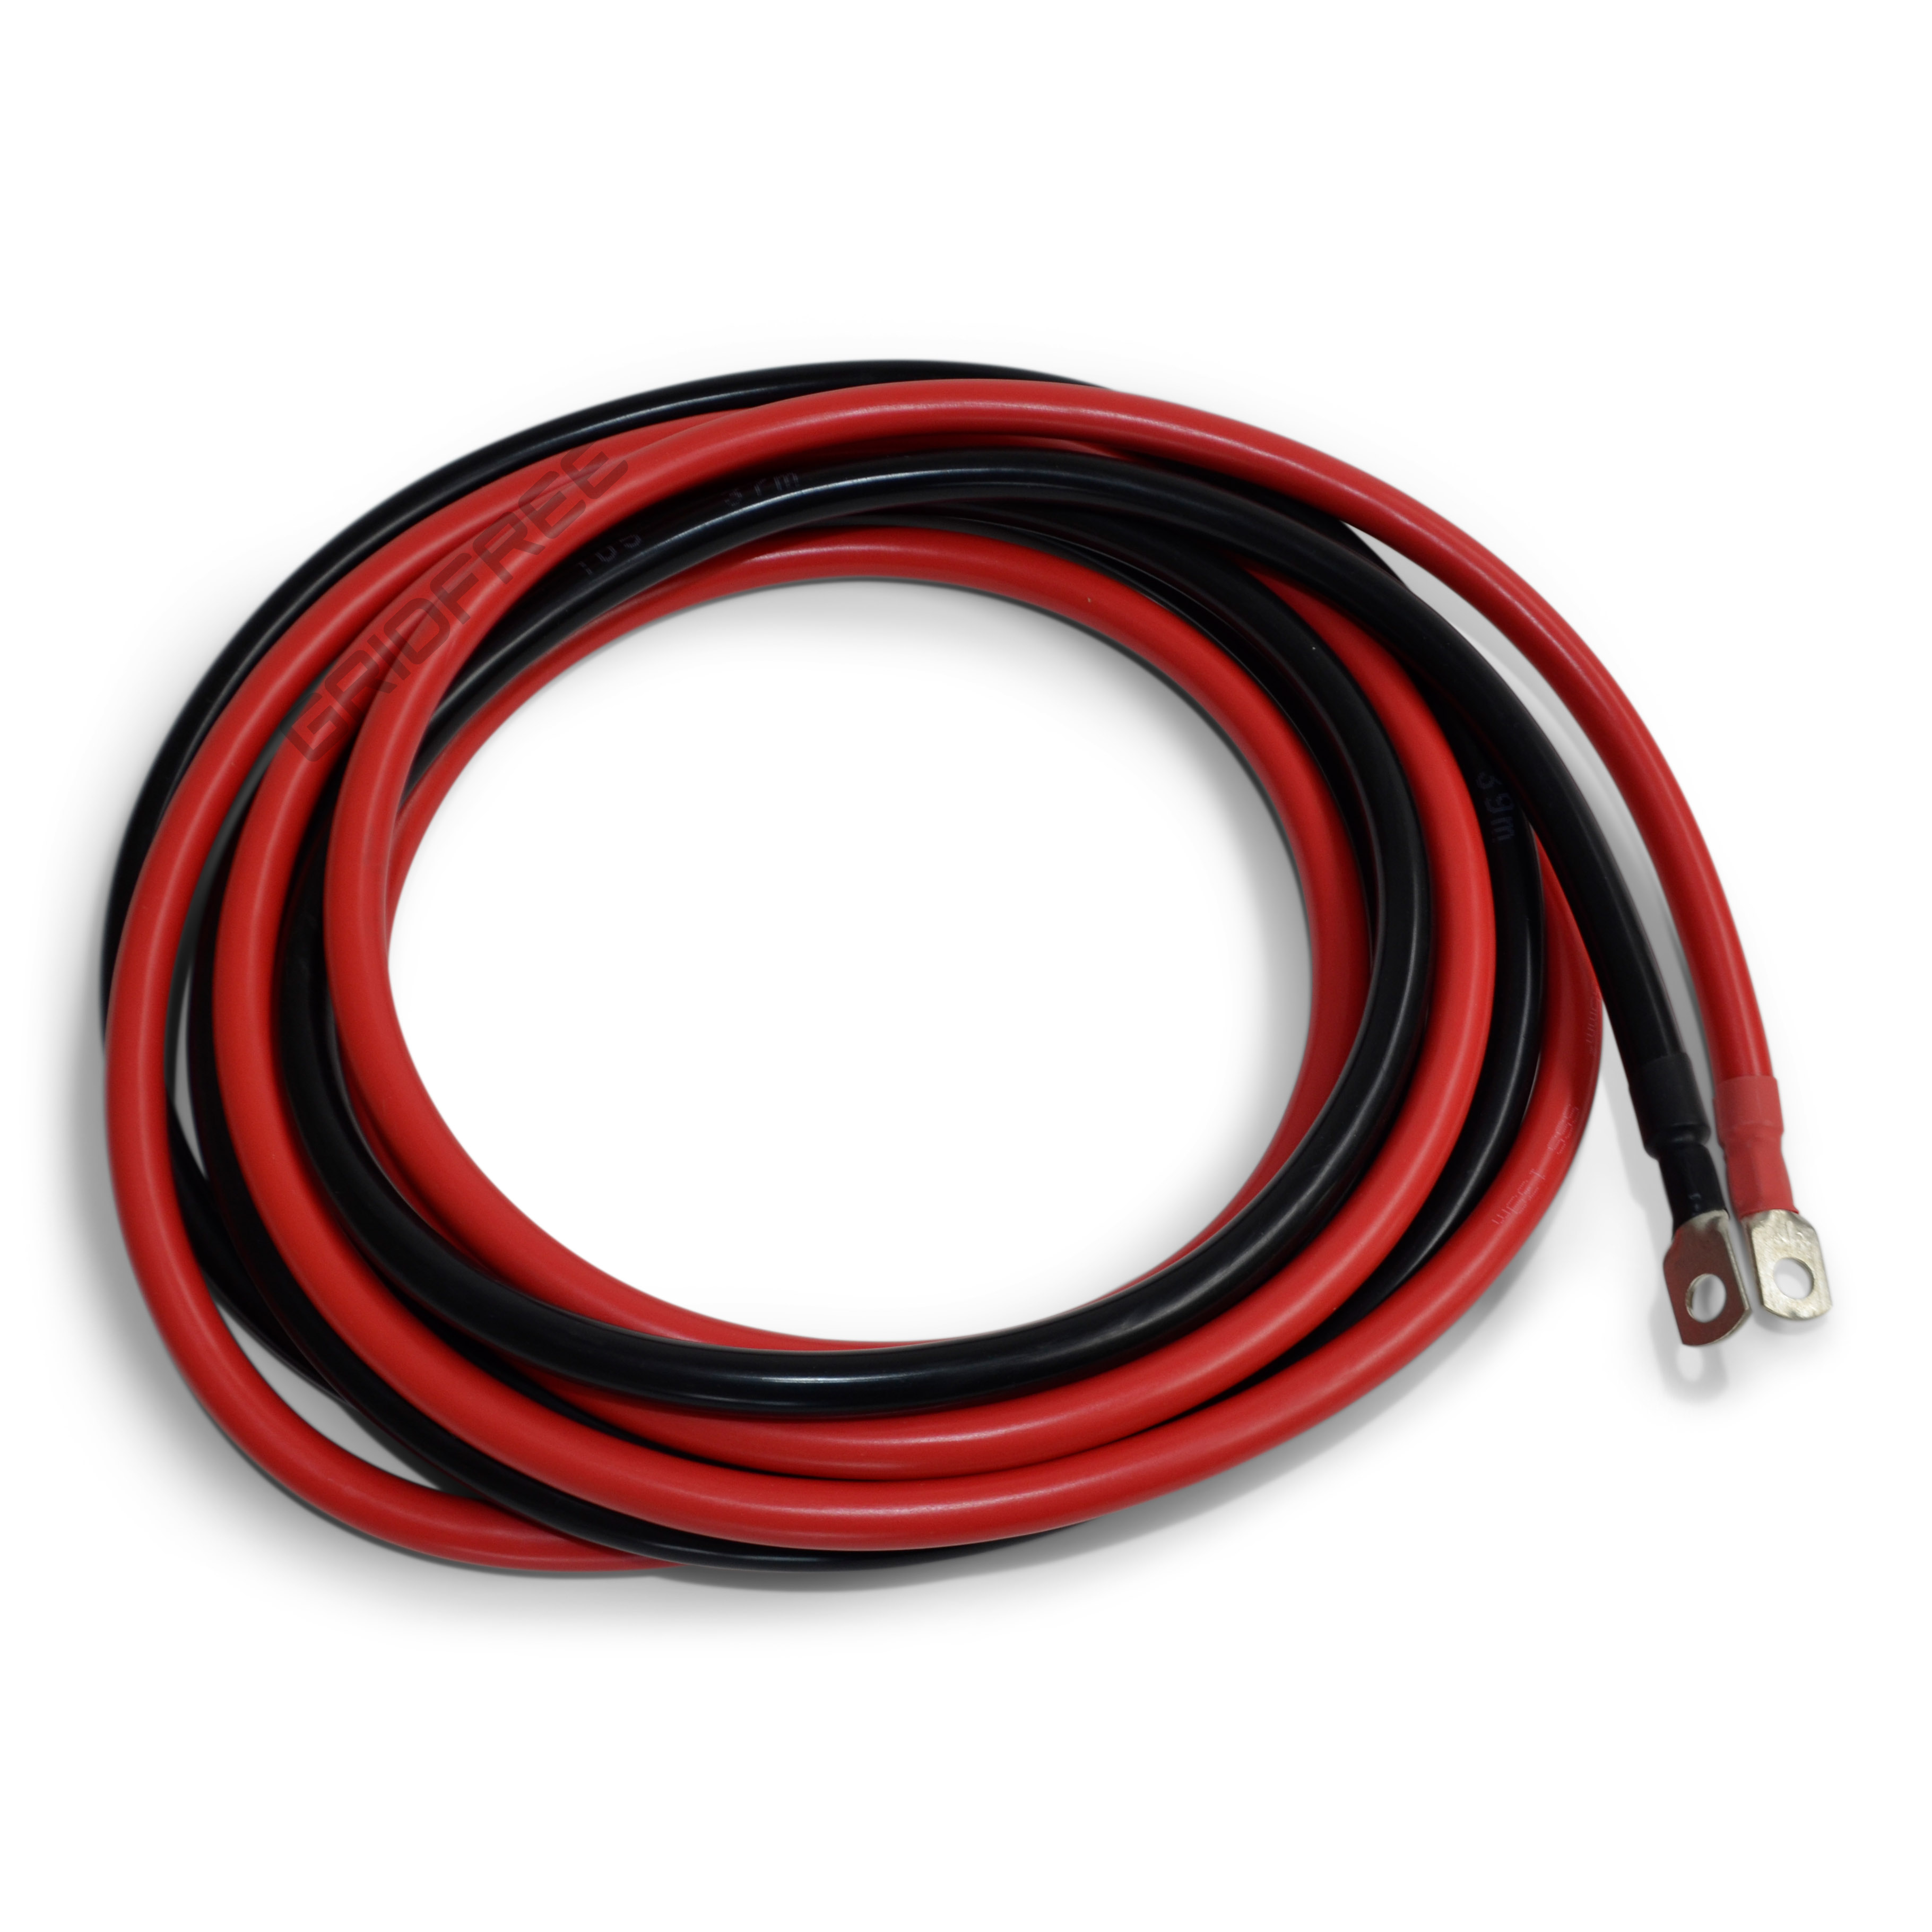 25mm² Pre-Crimped Cable Red&Black - 3m